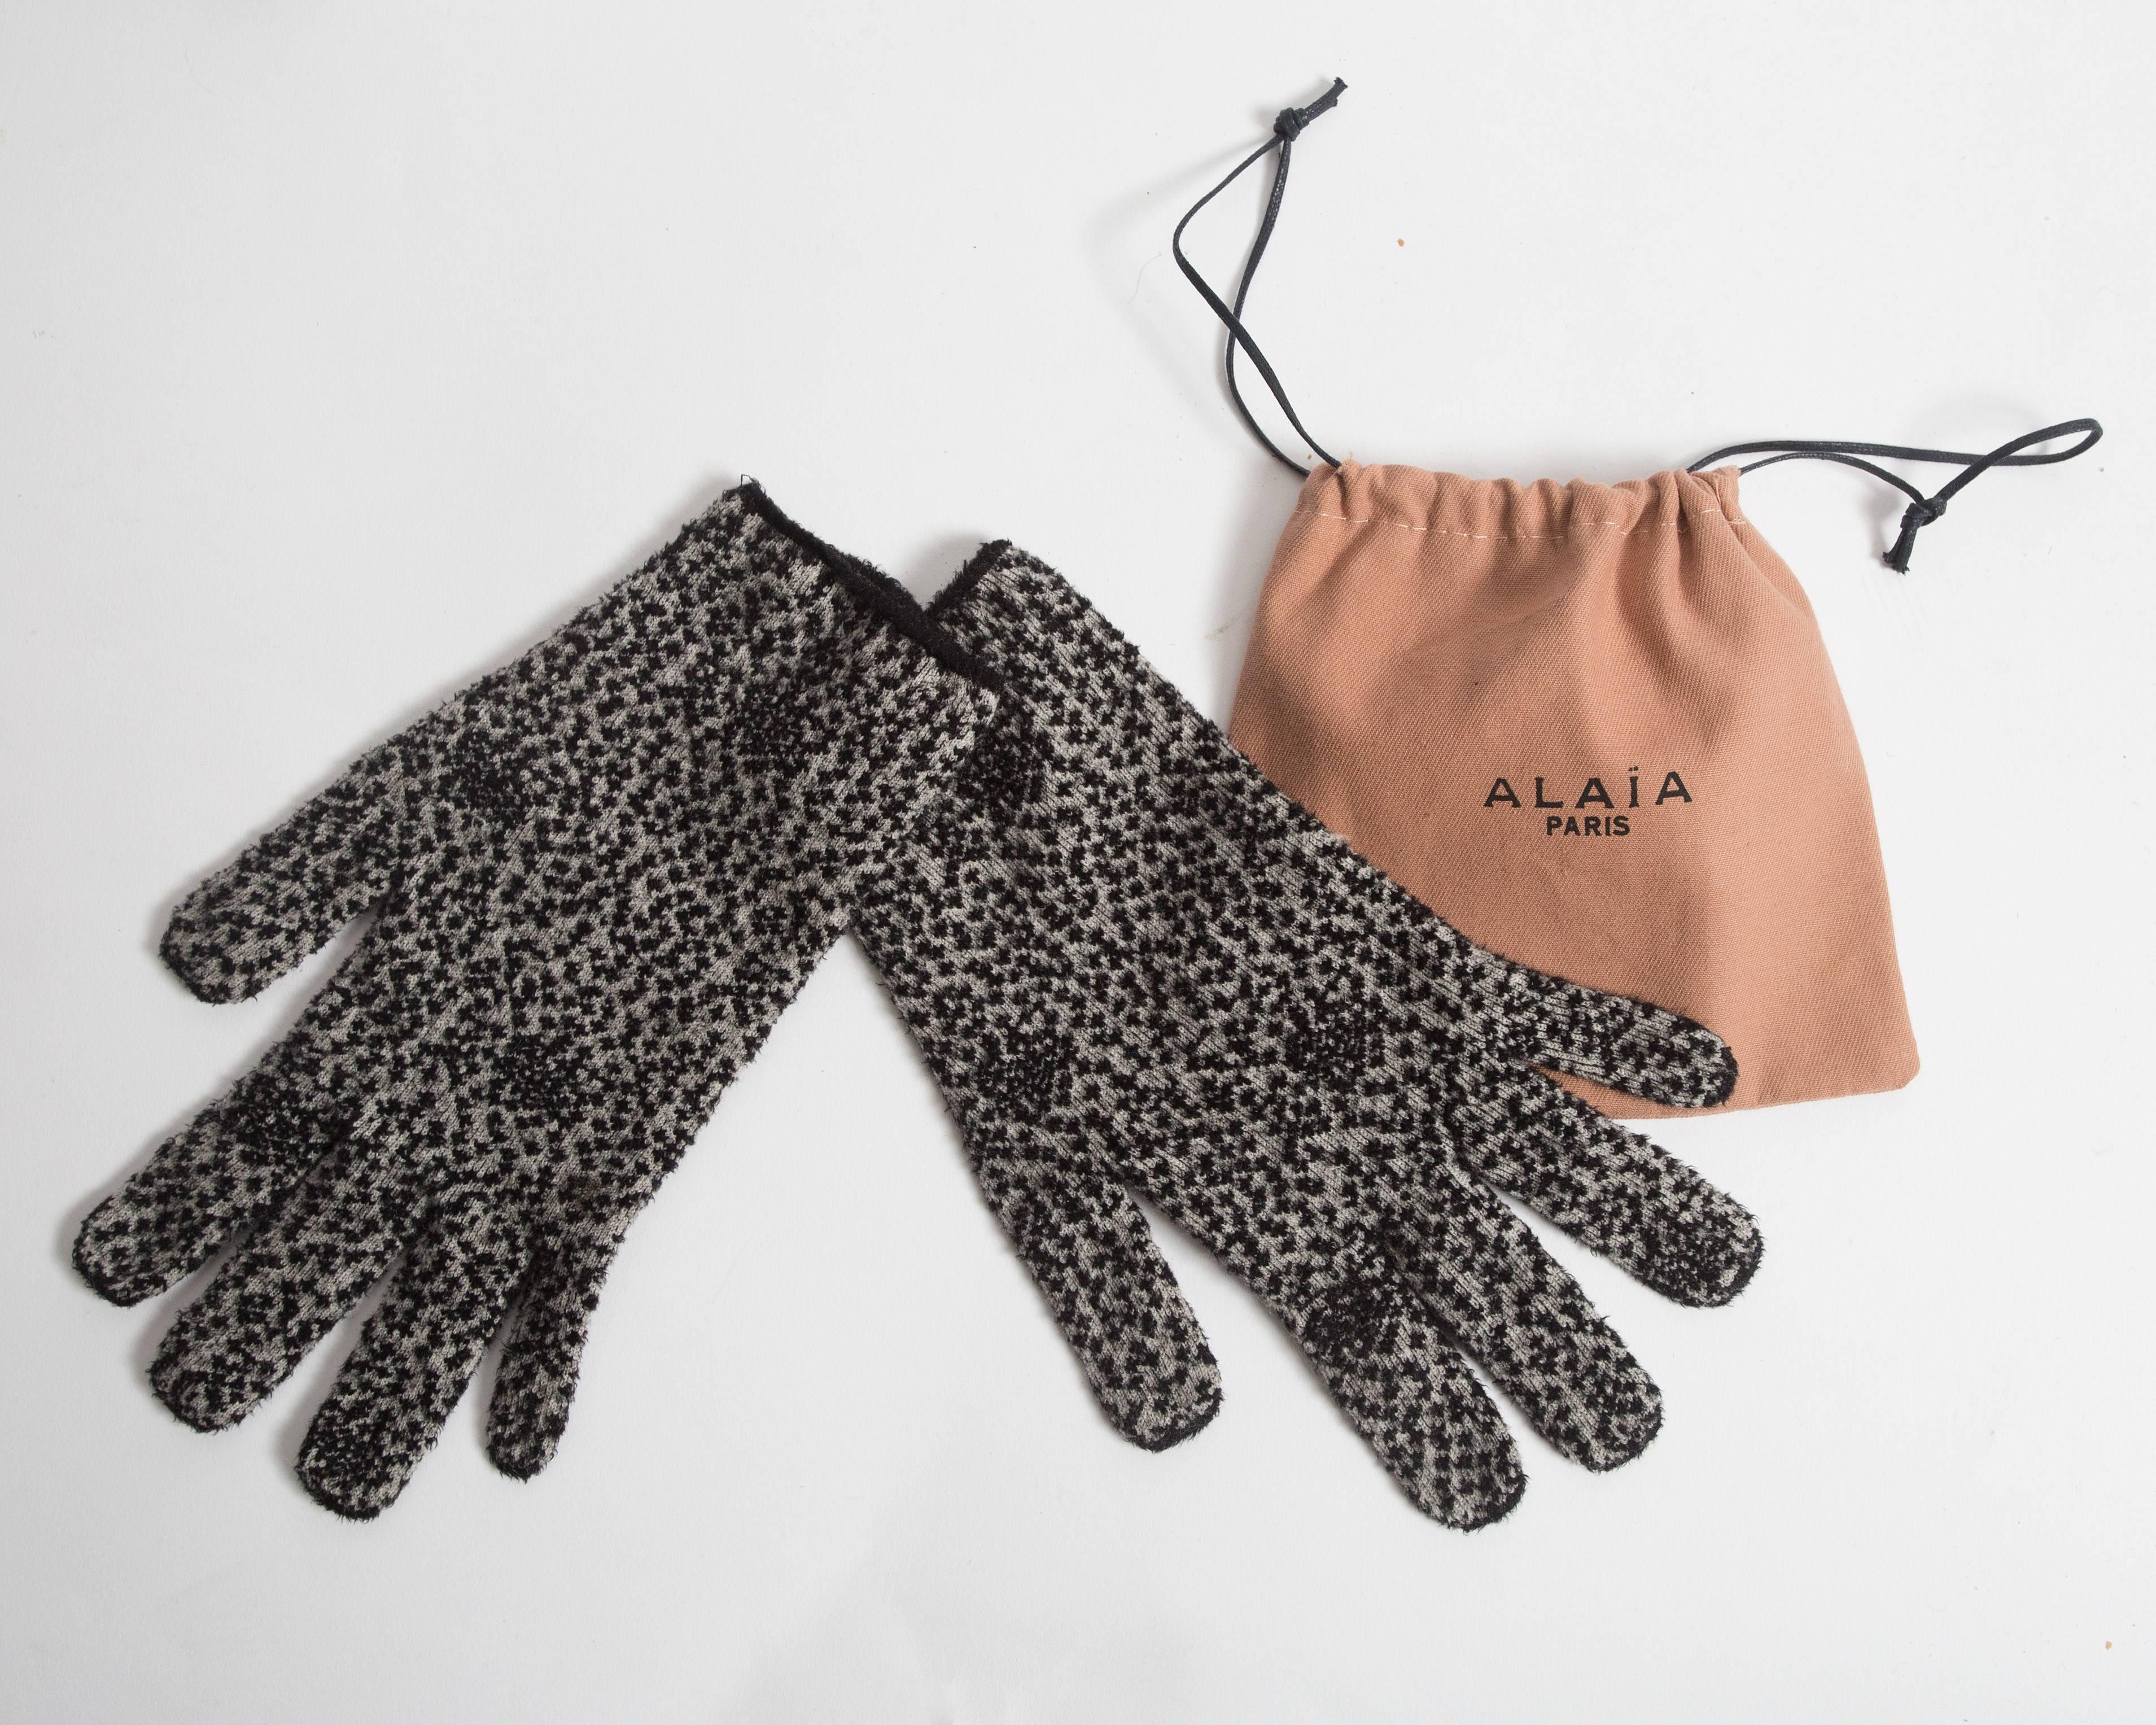 Alaia knitted sweater dress, leggings and gloves ensemble  2